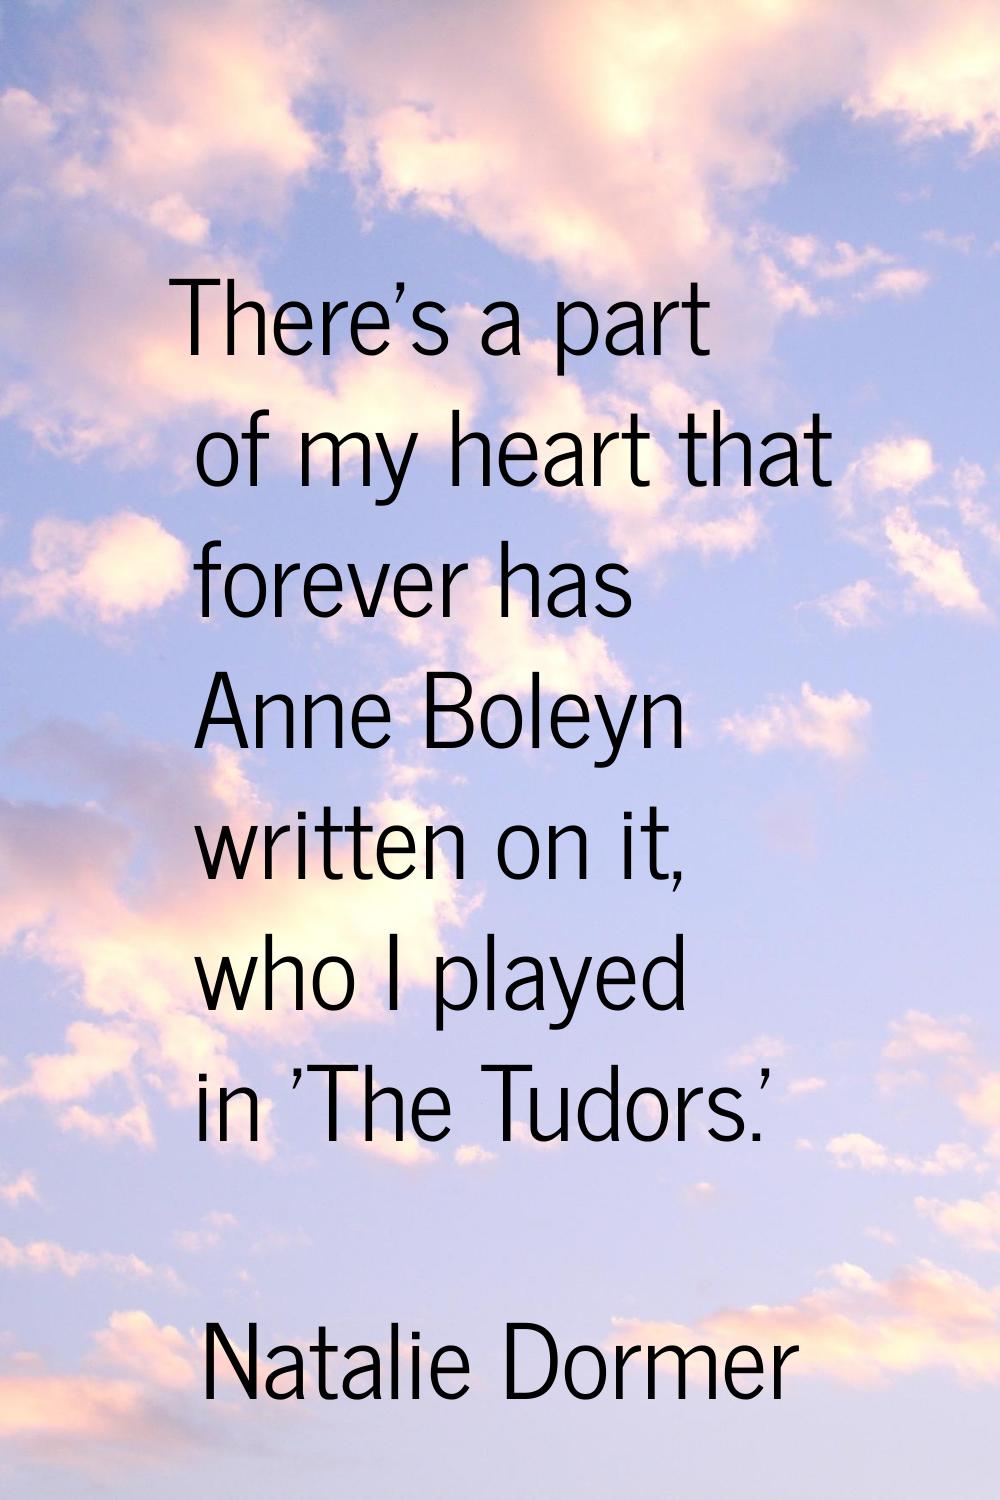 There's a part of my heart that forever has Anne Boleyn written on it, who I played in 'The Tudors.